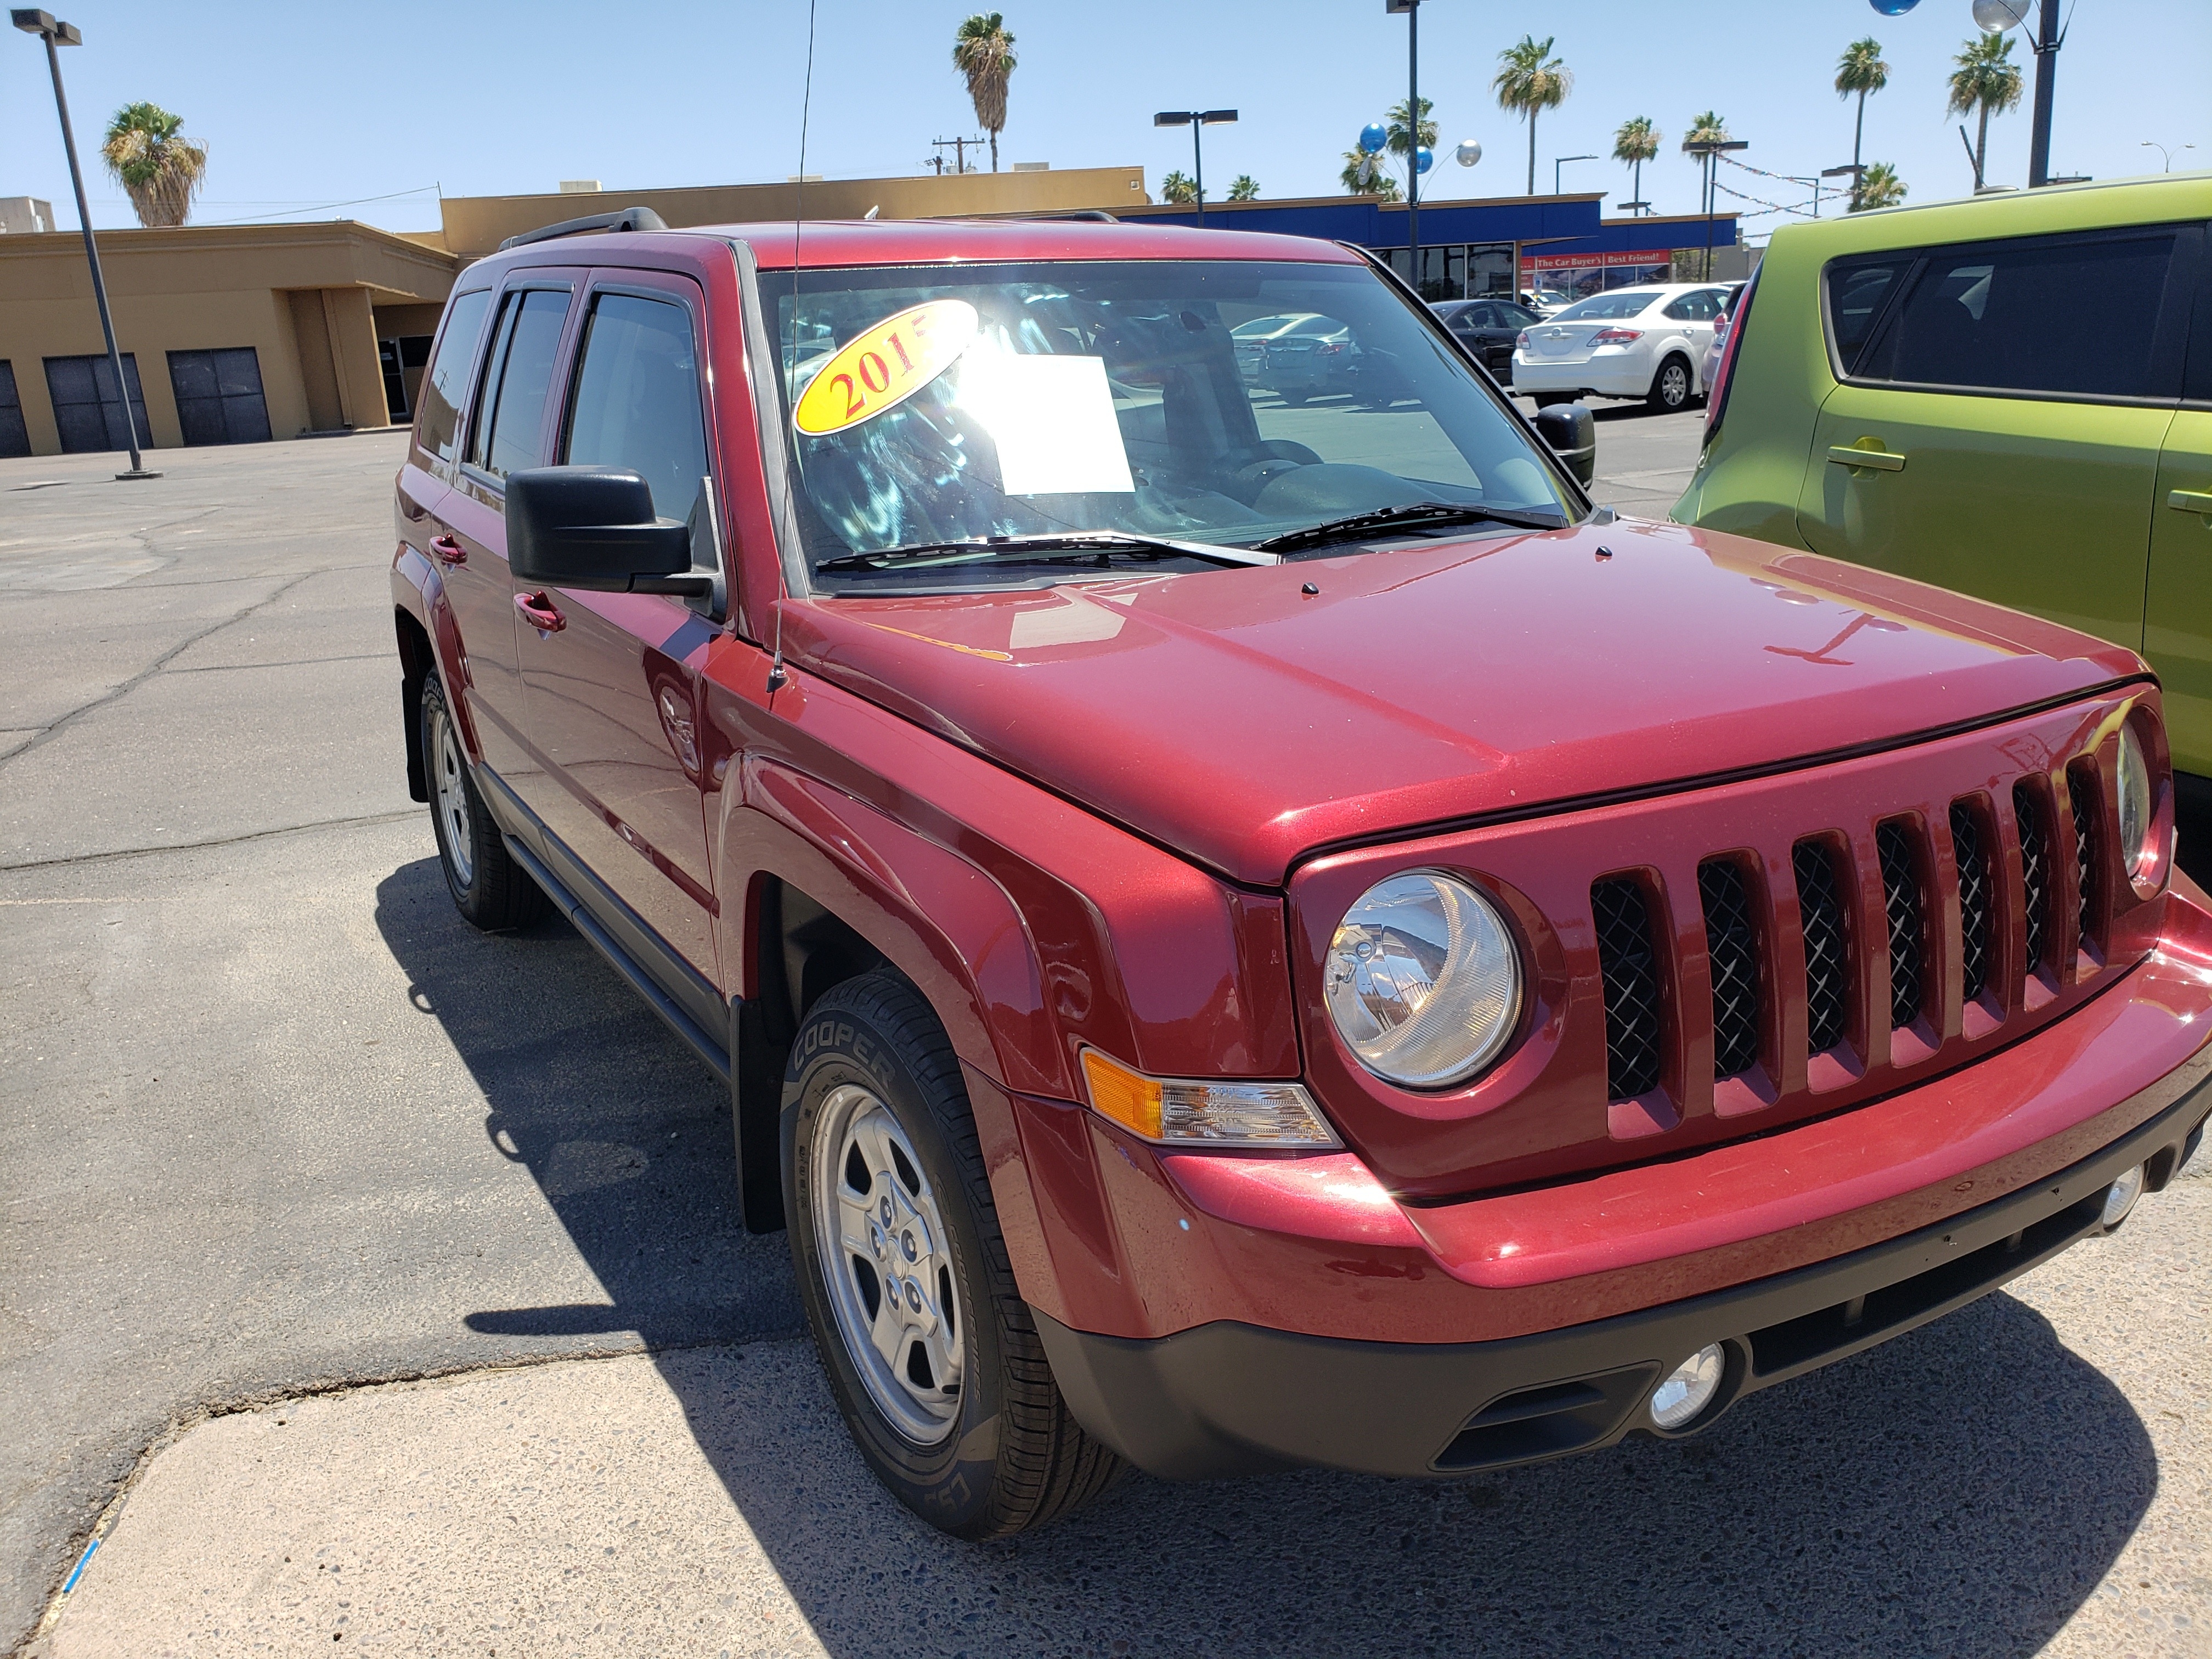 PreOwned 2015 Jeep PATRIOT 4 DOOR WAGON Sport Utility in